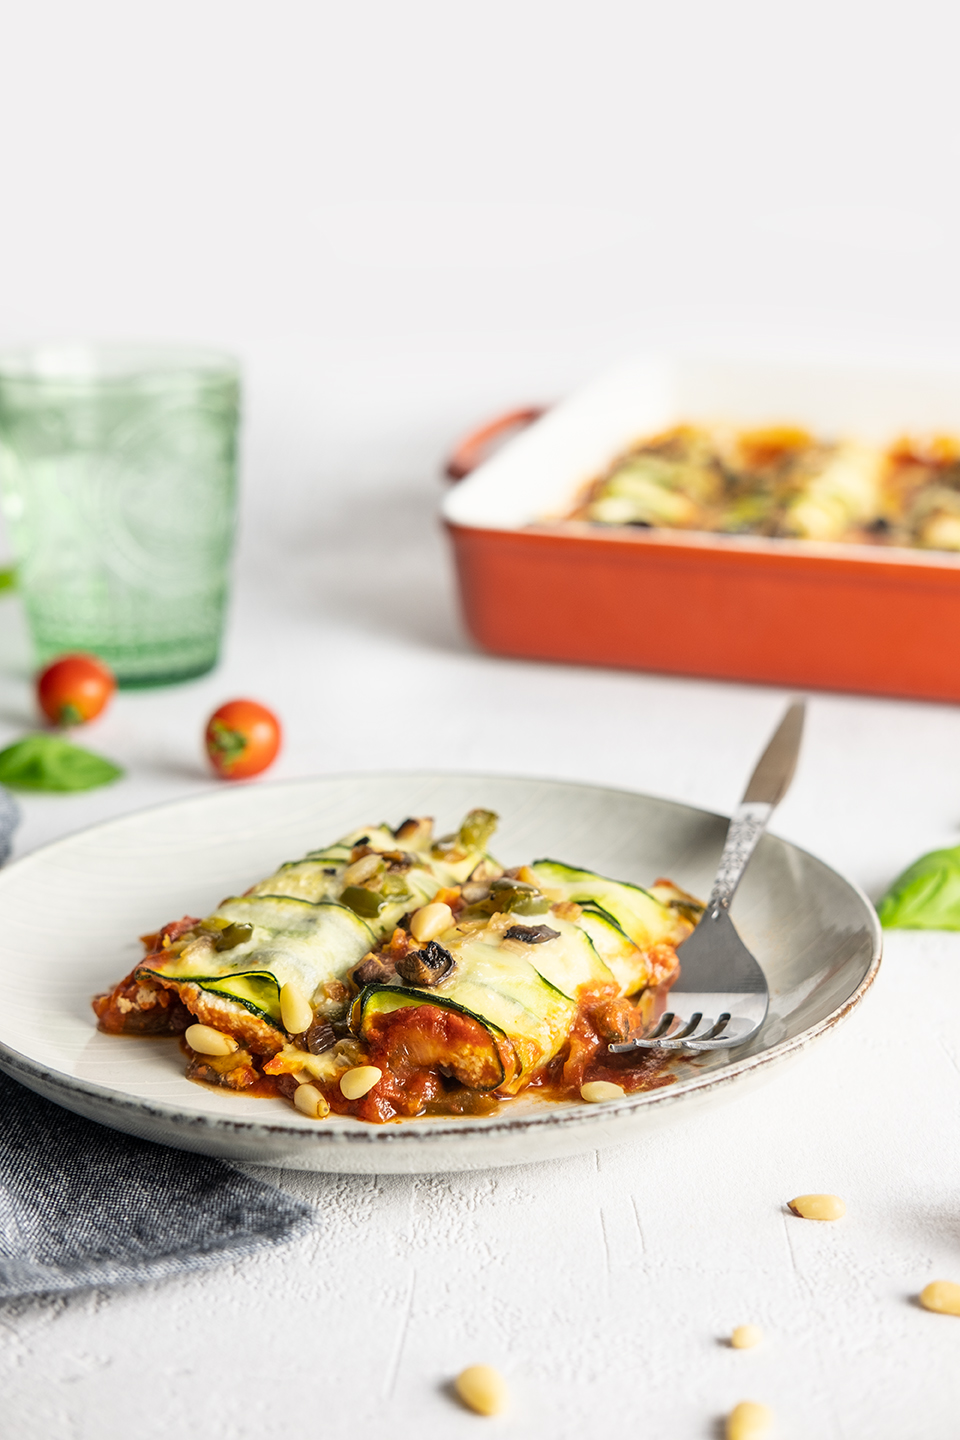  Two Low carb zucchini and ricotta cannelloni served on a grey salad plate.  Casserole dish in background with ice water in a green glass.  